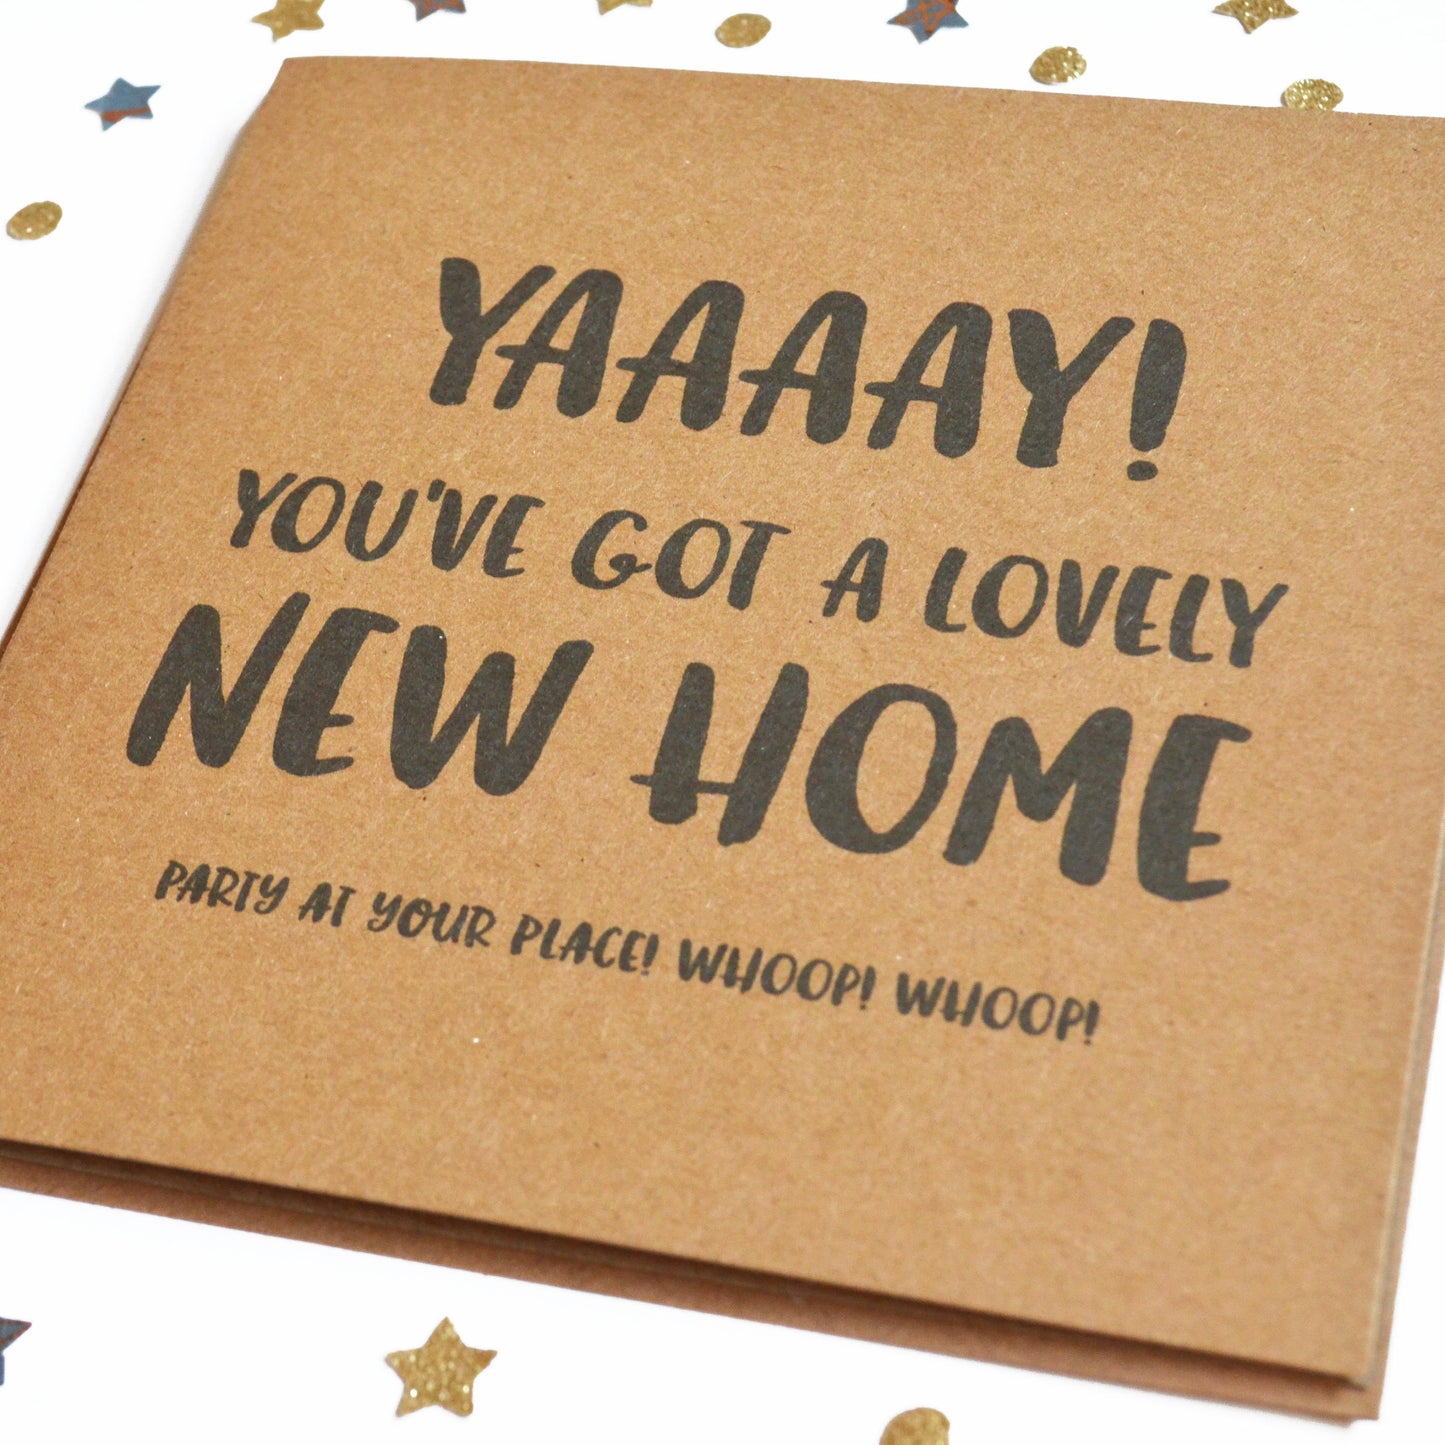 "Yay! You've Got A Lovely New Home" Funny New House Card